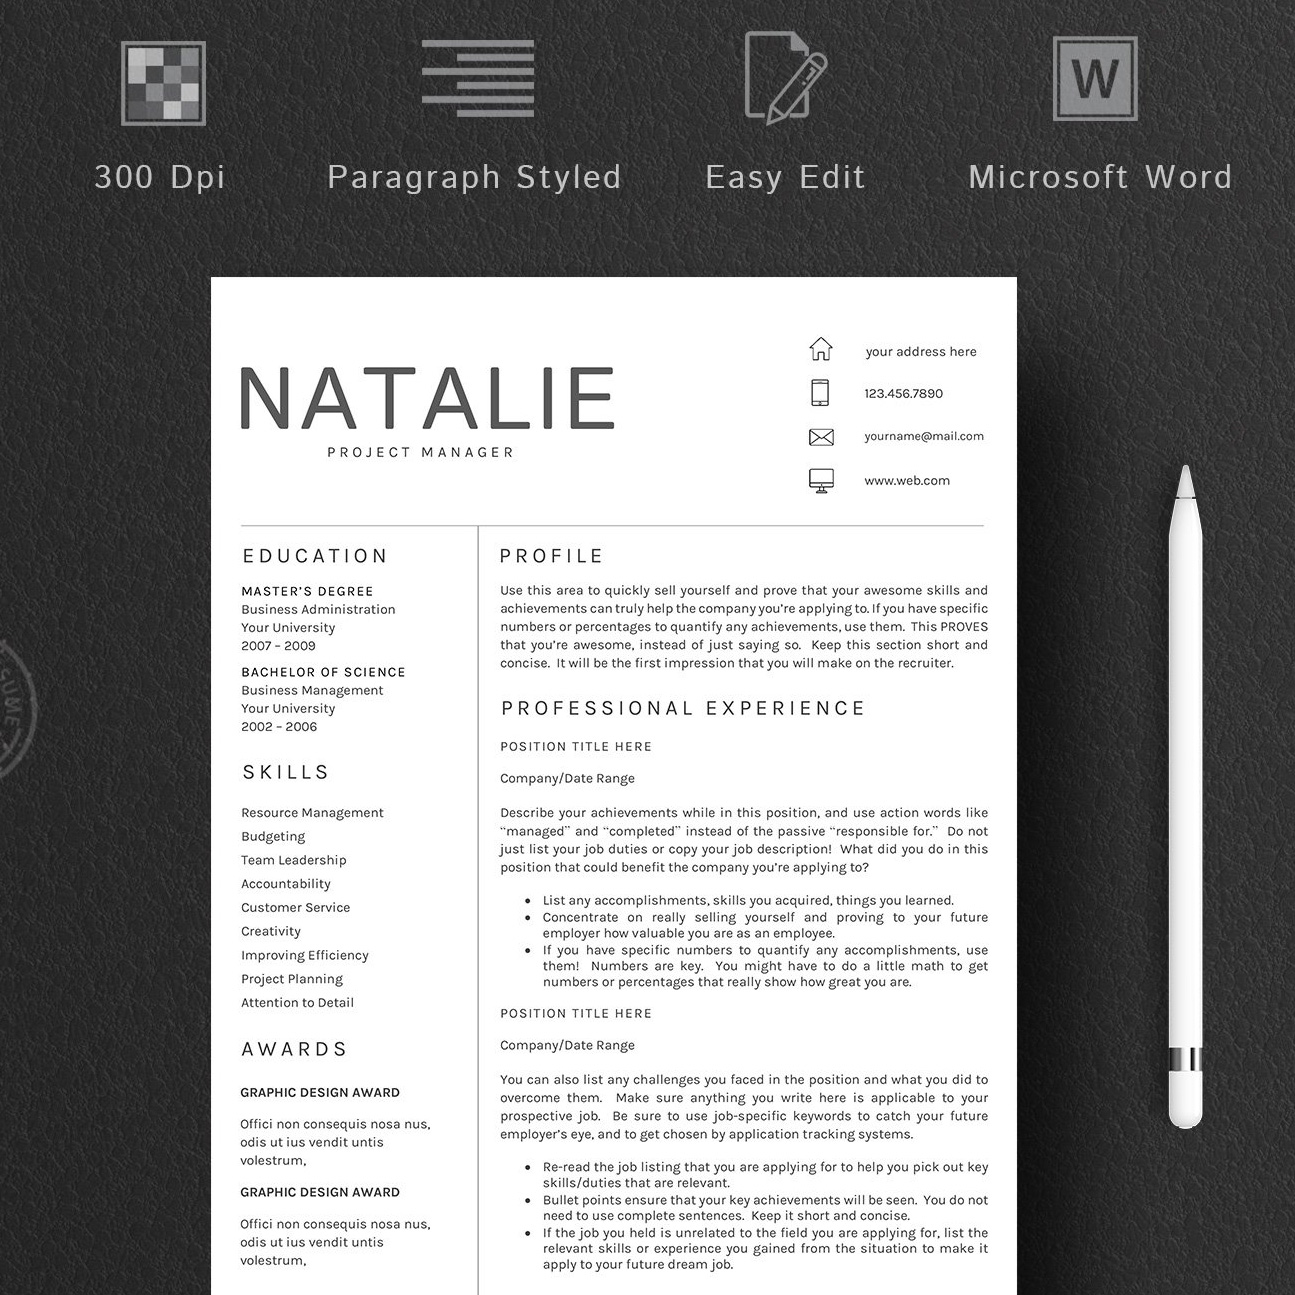 Resume Word Template 5 Pages/CV [DOC, PDF] – $9